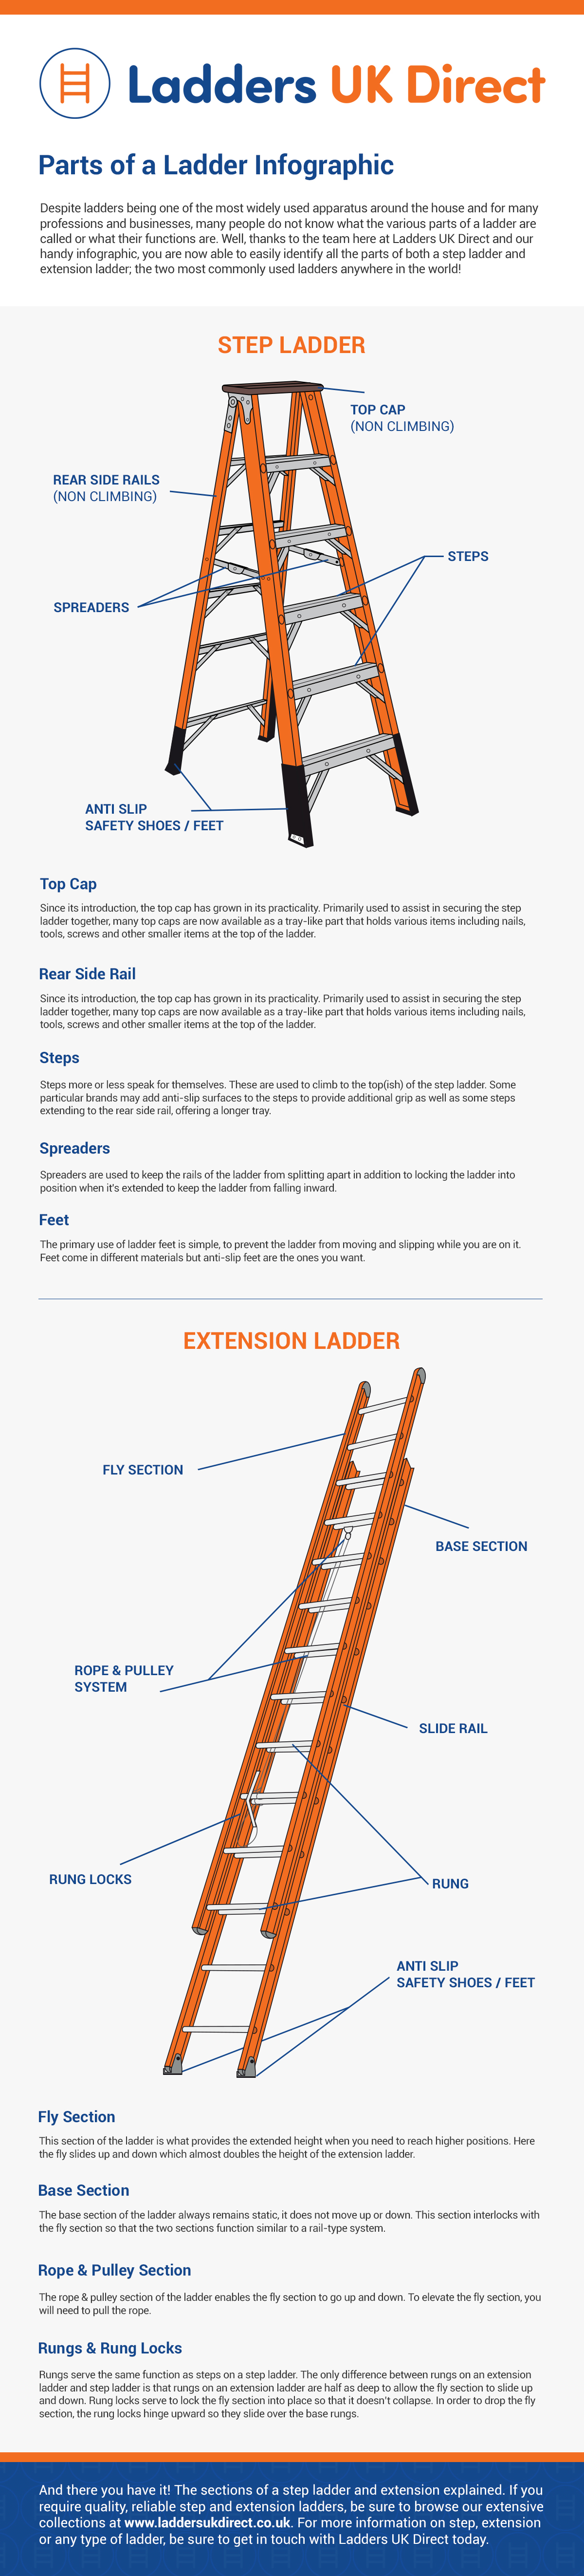 Parts of a Ladder Infographic